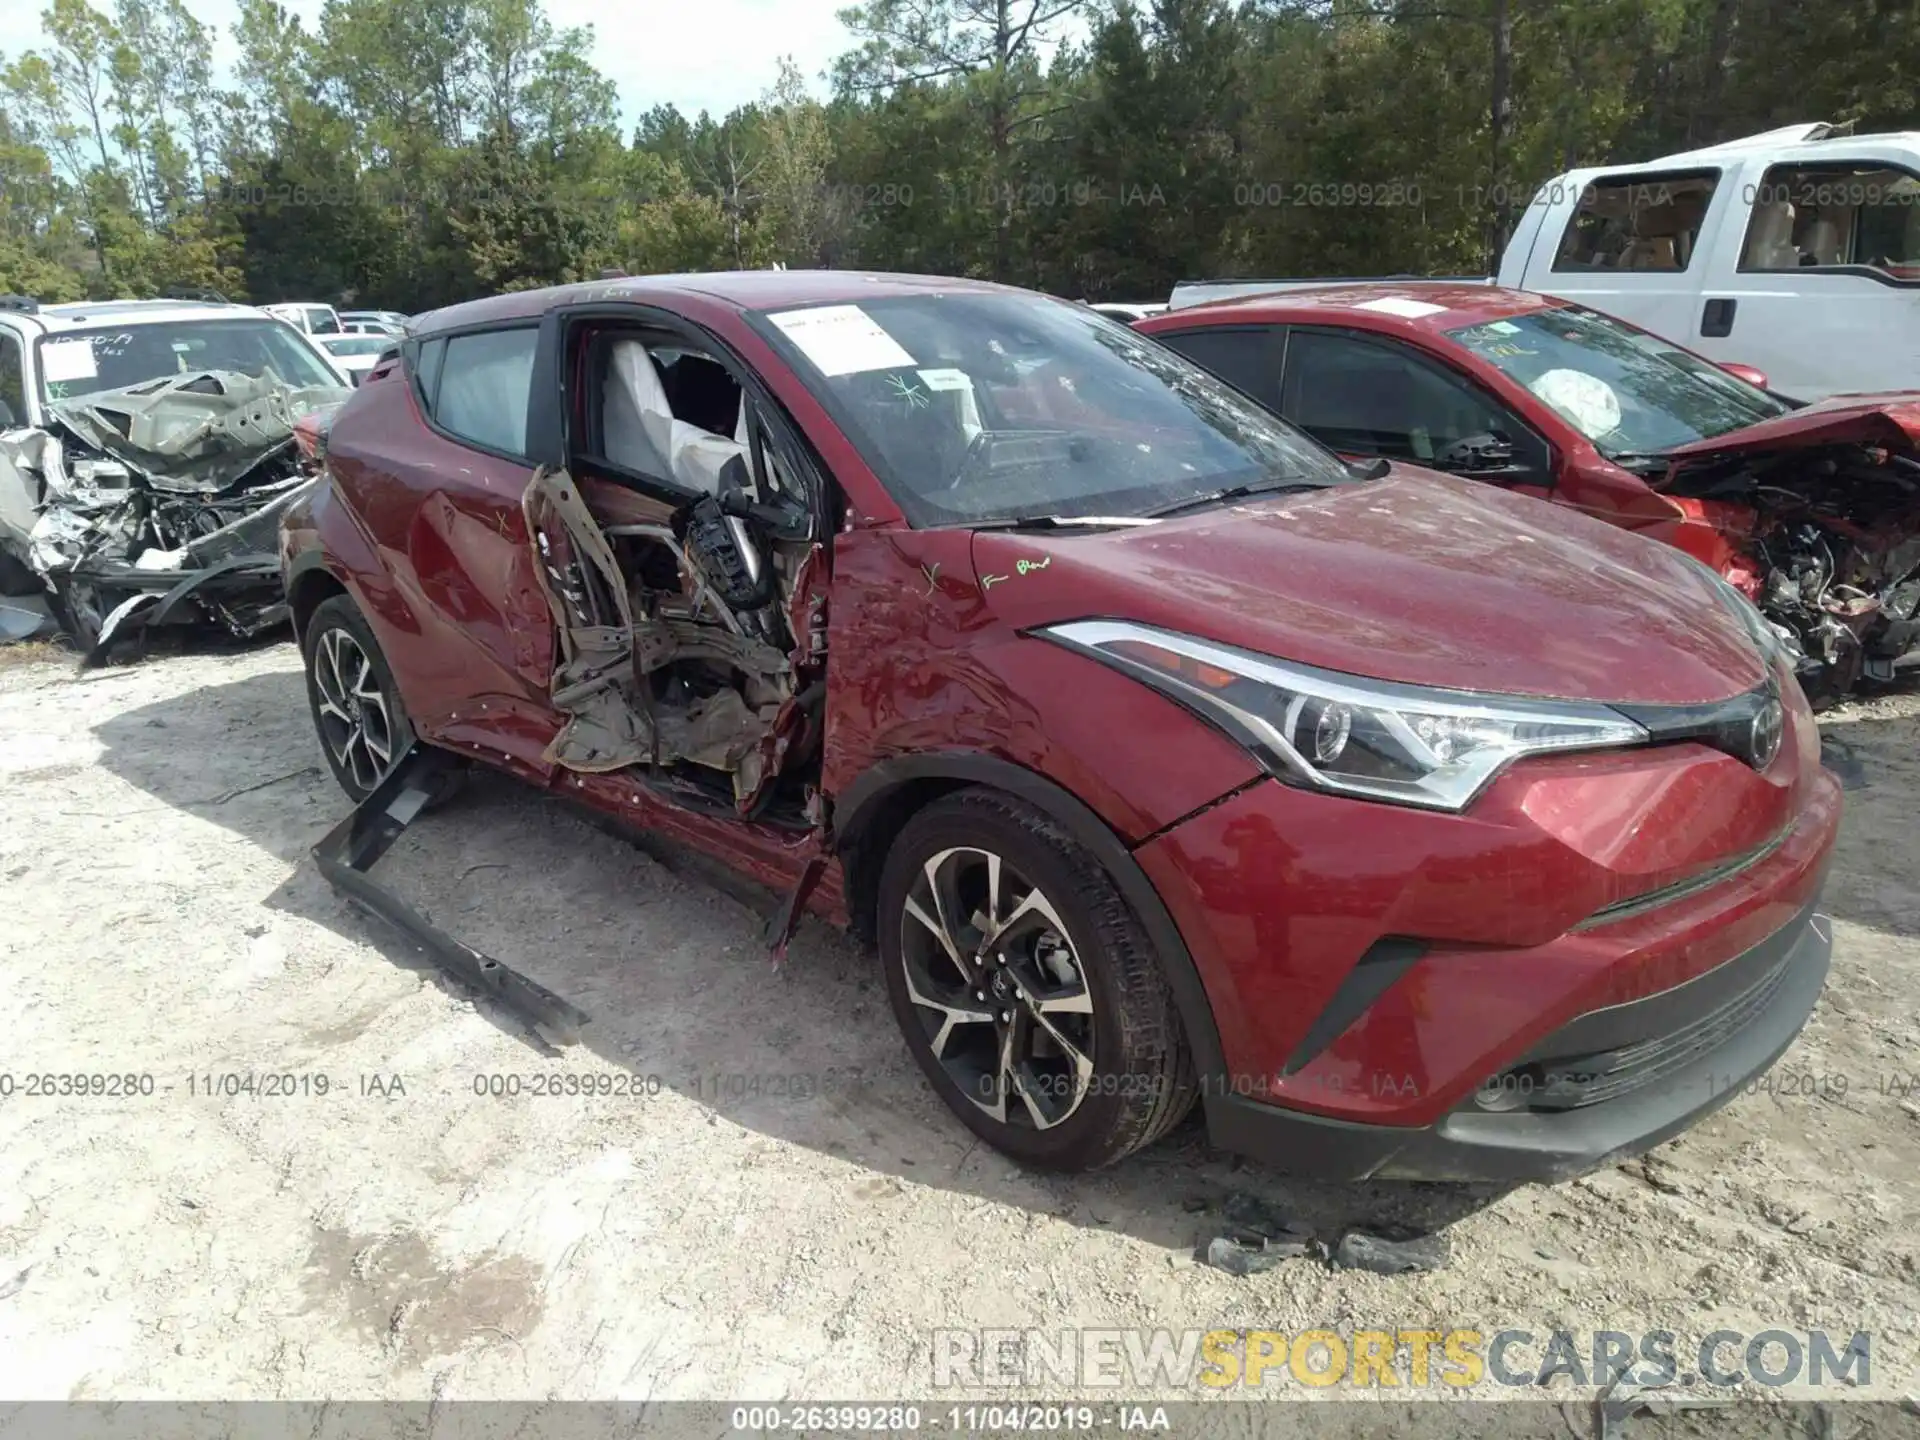 1 Photograph of a damaged car NMTKHMBXXKR075709 TOYOTA C-HR 2019